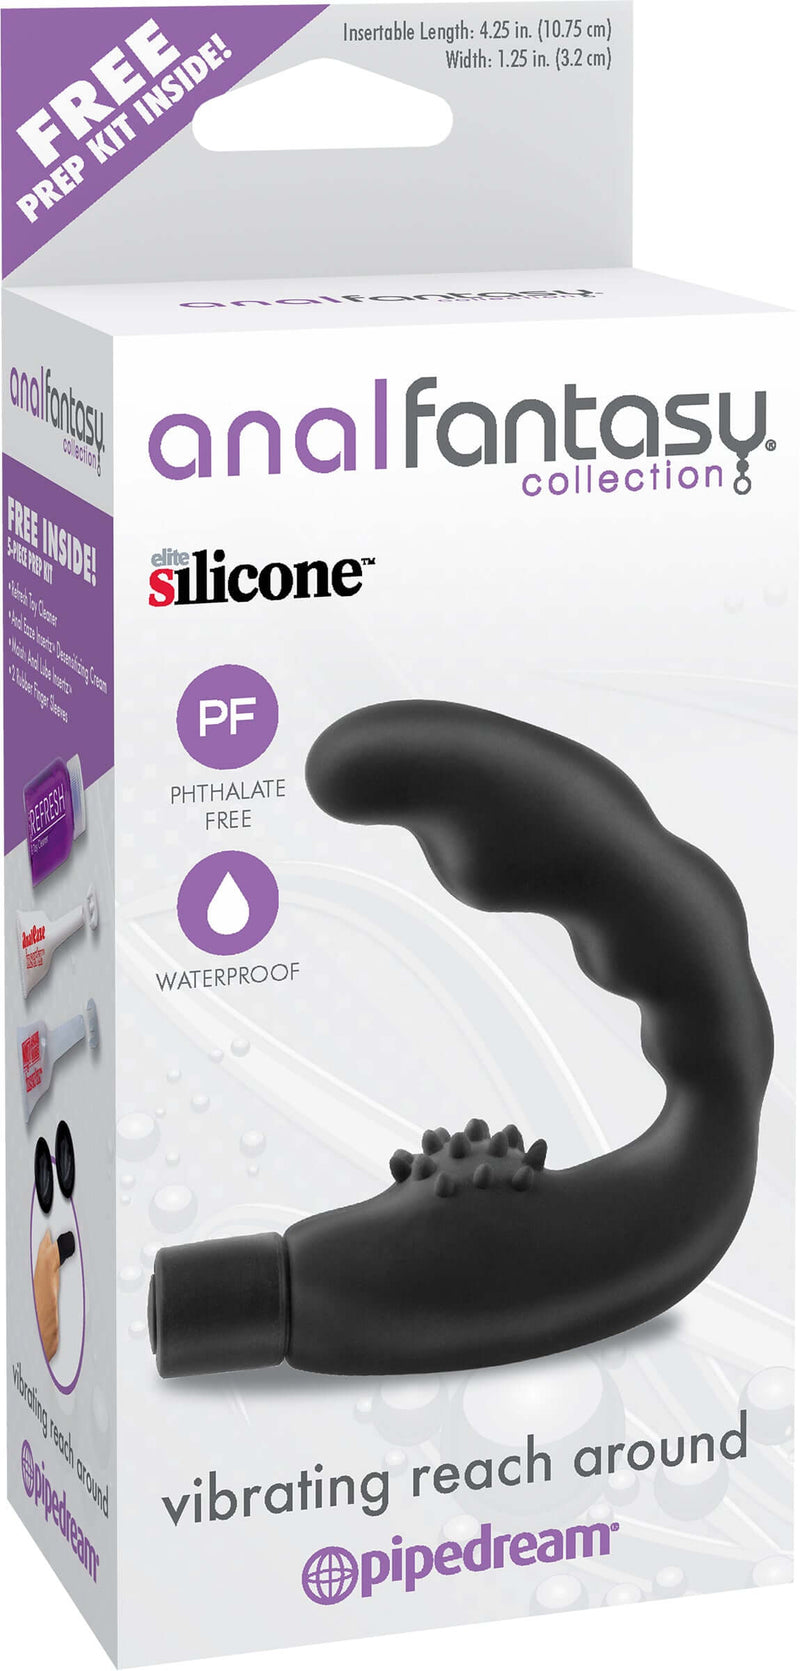 Pipedream Products Anal Fantasy Reach Around Vibrating at $34.99